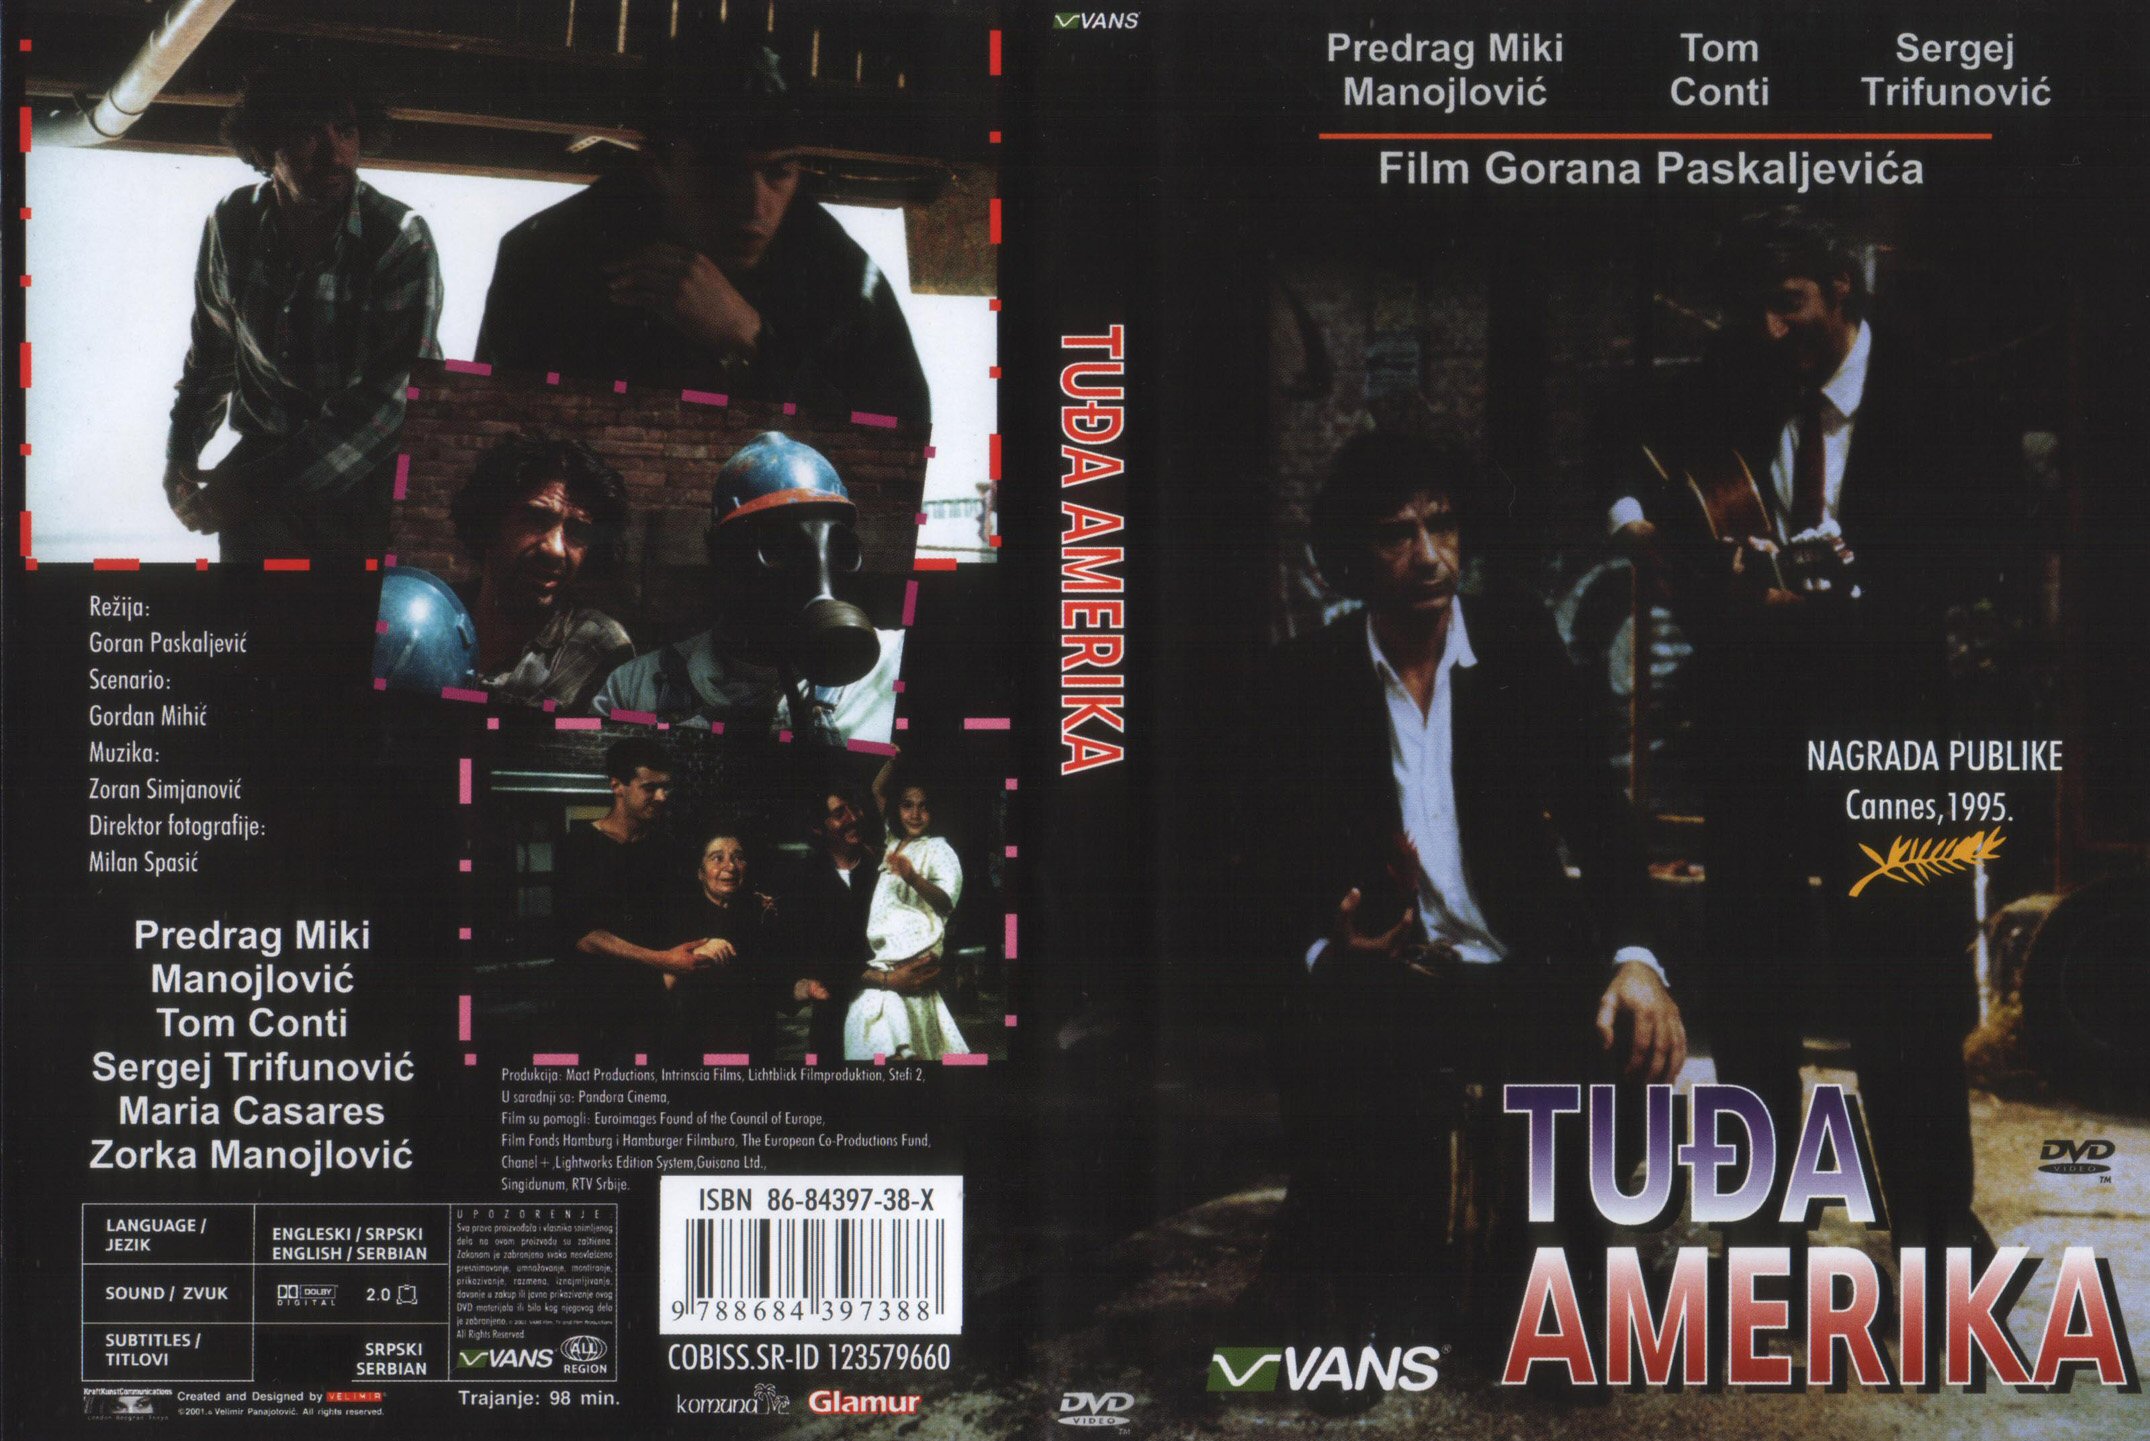 Click to view full size image -  DVD Cover - T - tudja_amerika_dvd - tudja_amerika_dvd.jpg